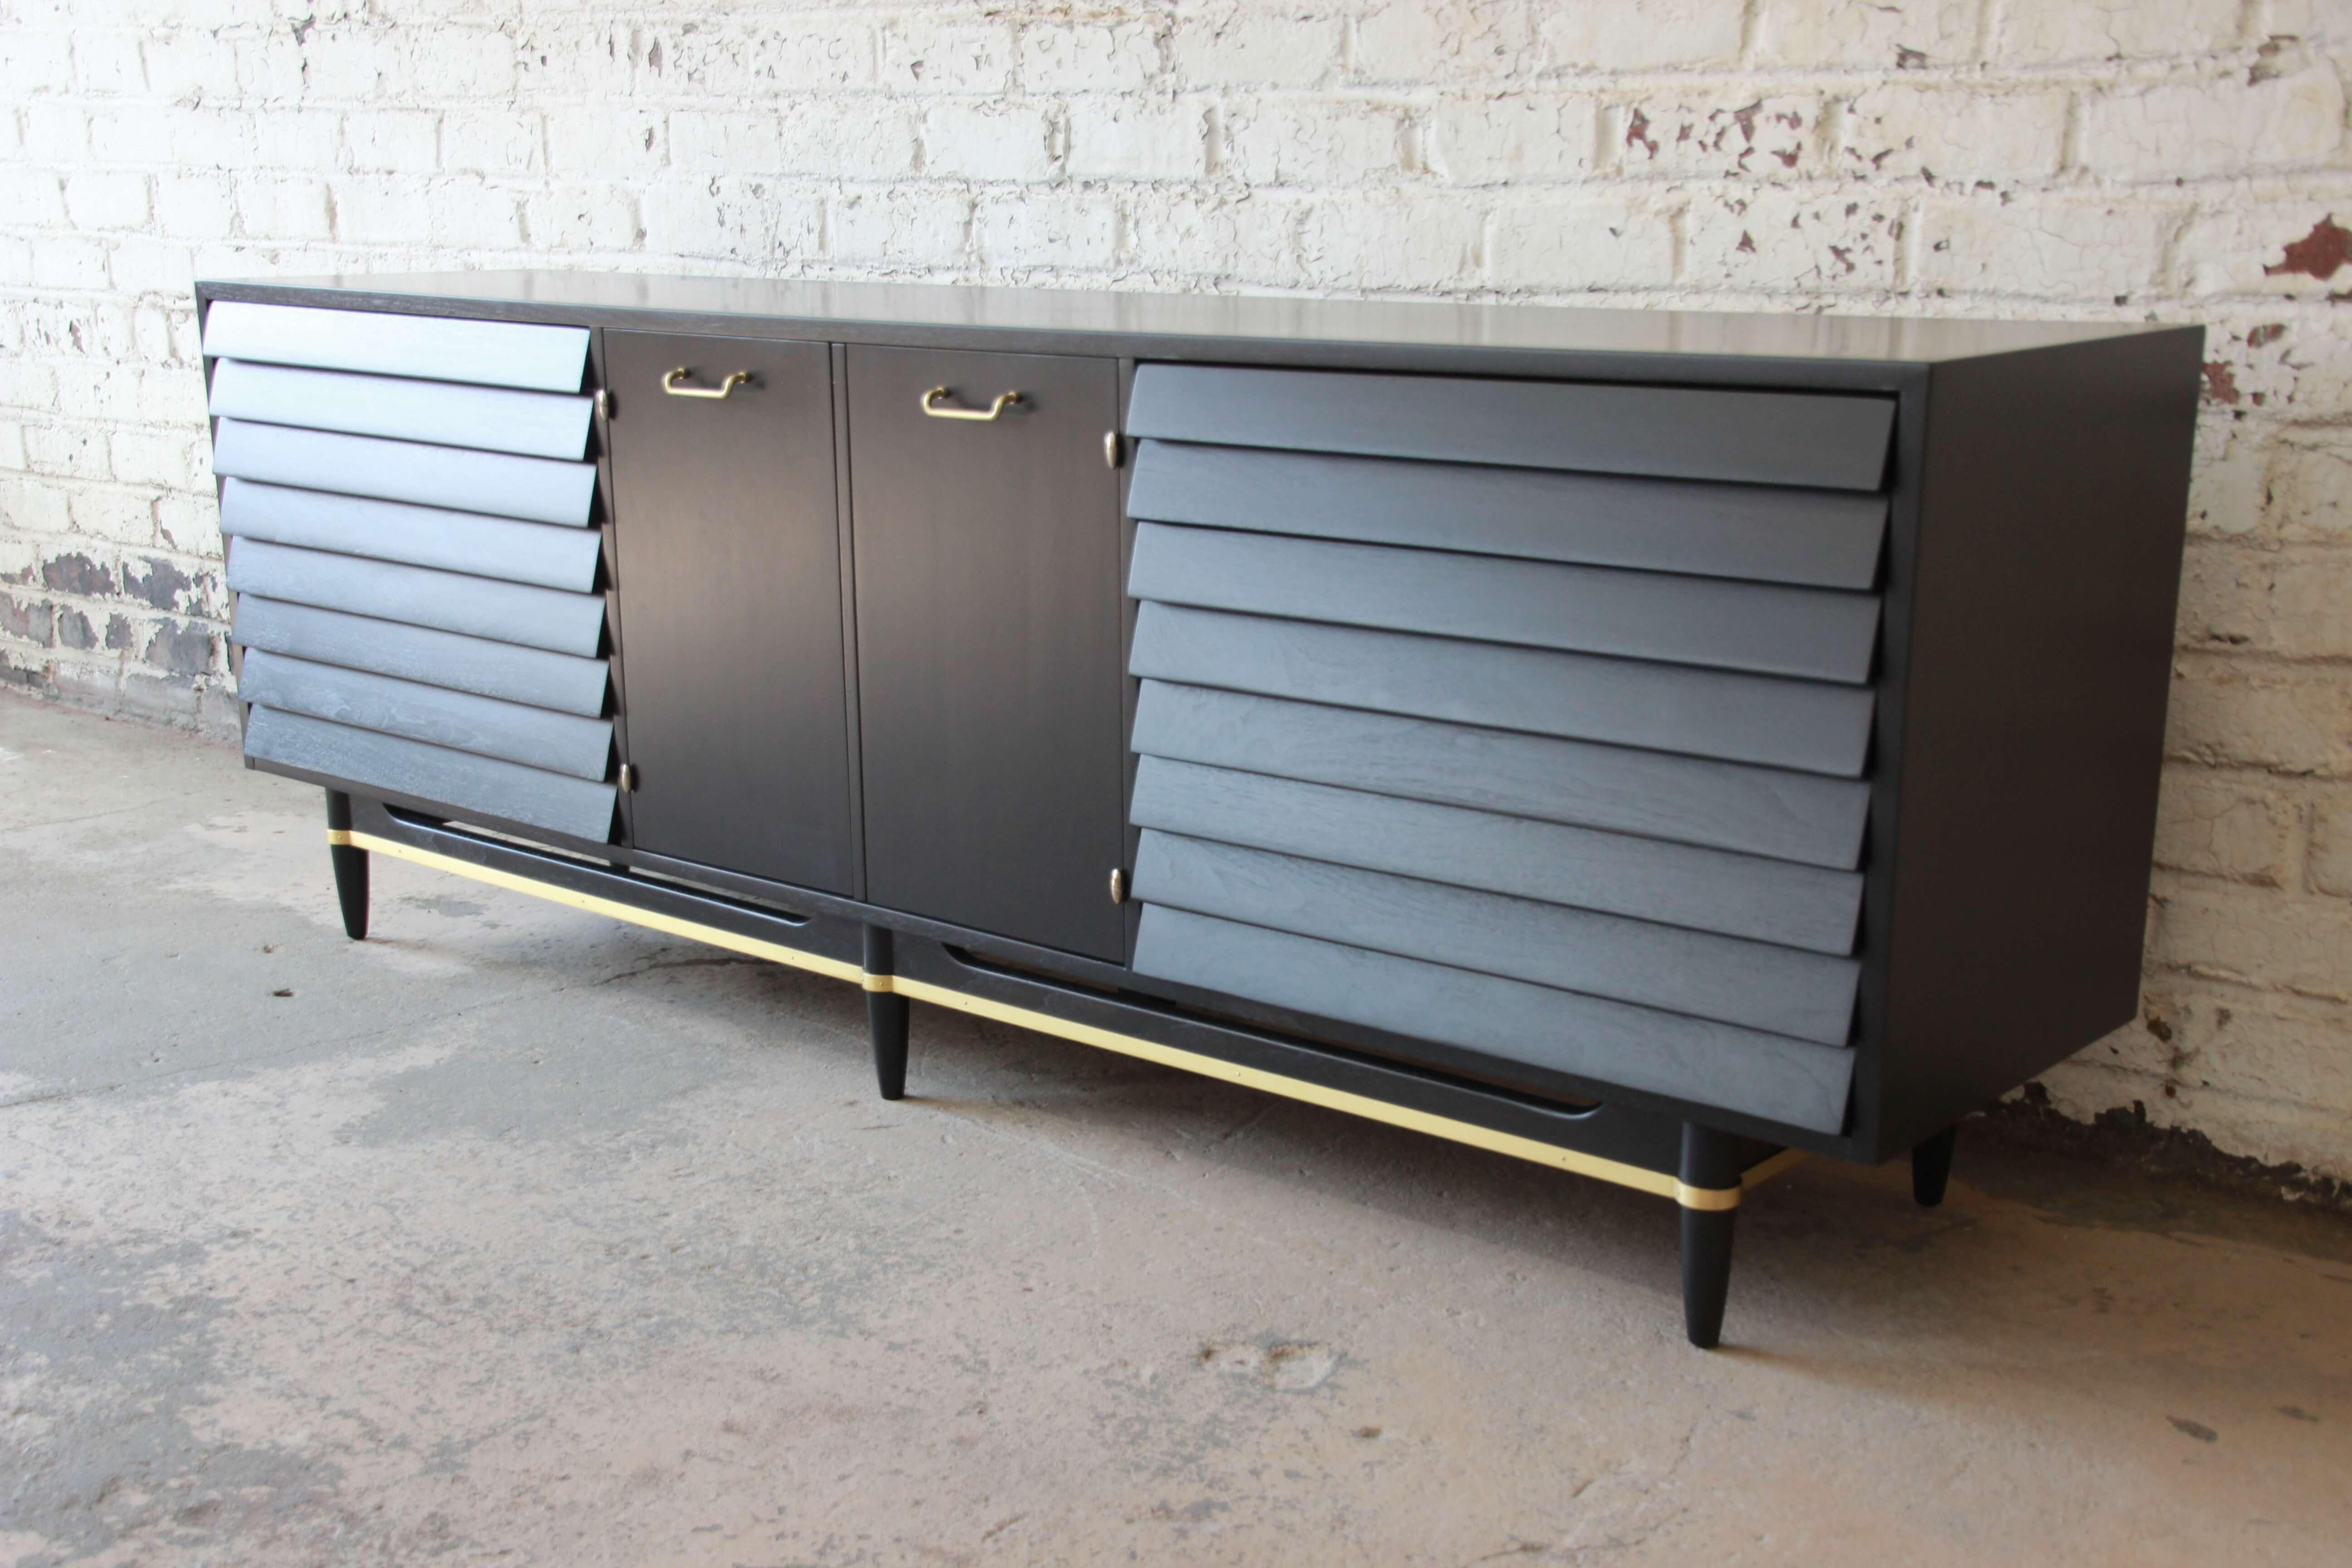 Offering an outstanding unique piece to the market, Merton Gershun louvered door ebonized dresser or credenza. This piece has been pristinely refinished in a ebonized walnut. Each end of the cabinet offers three large louvered drawers. The two